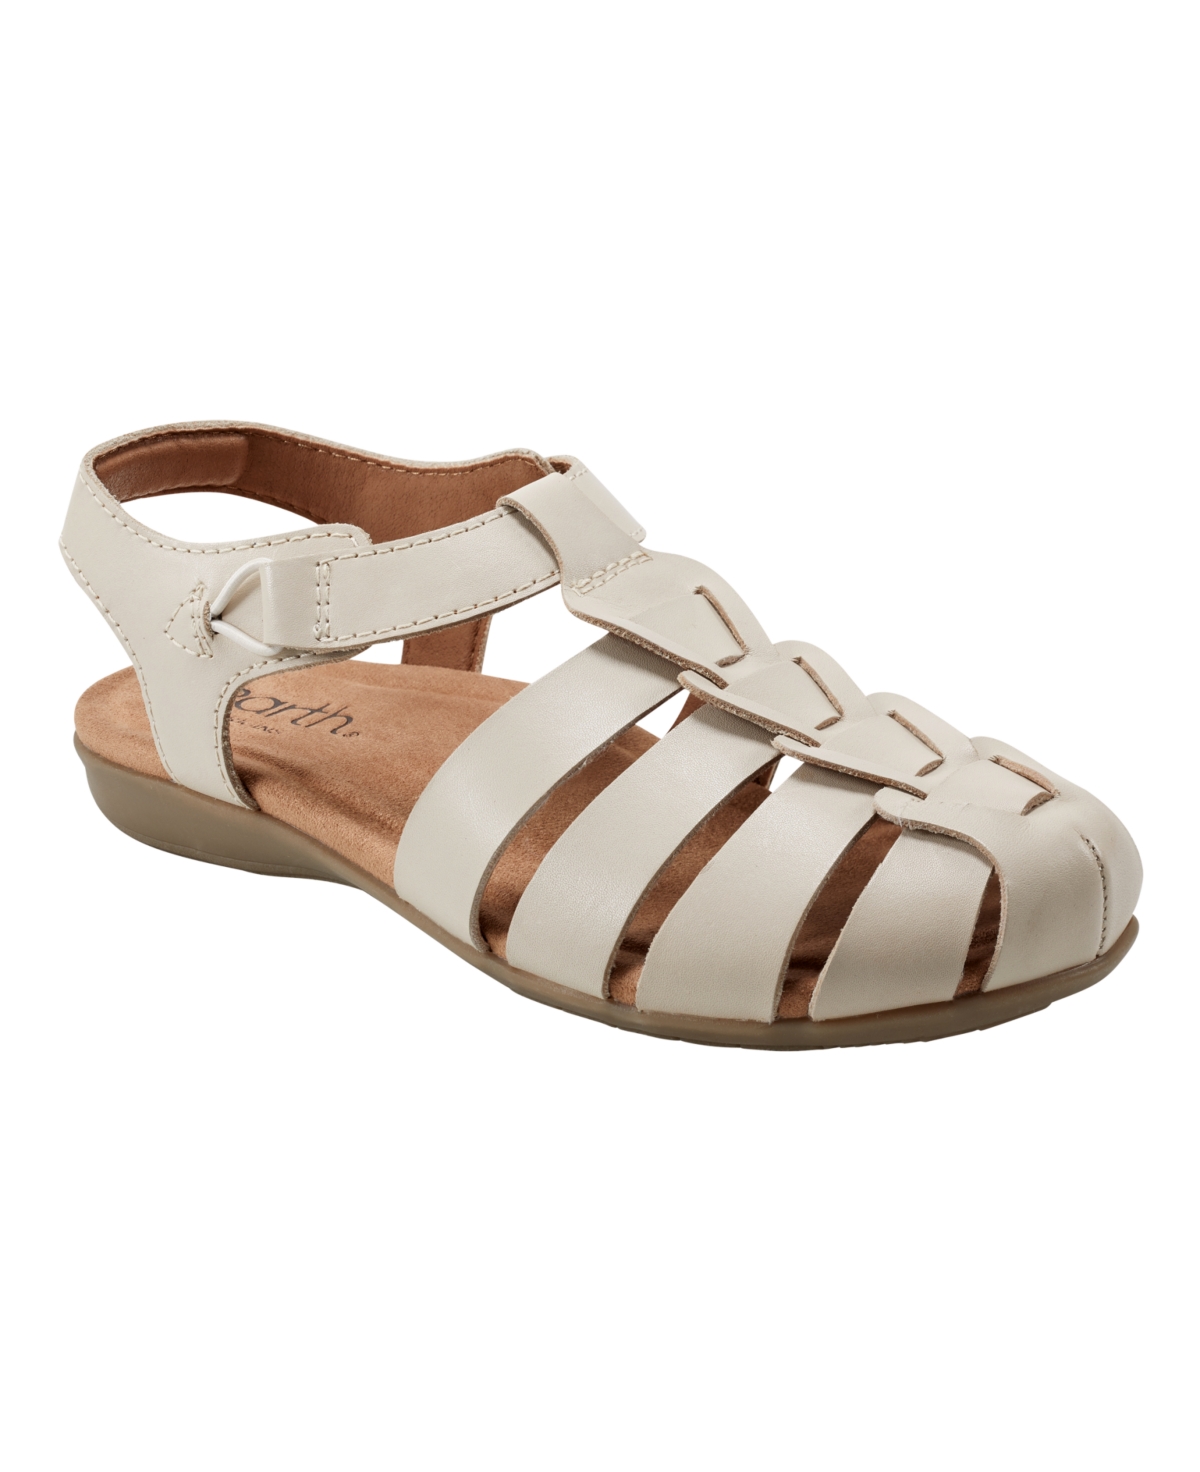 Earth Women's Blake Casual Slip-on Strappy Flat Sandals - Light Natural Nubuck